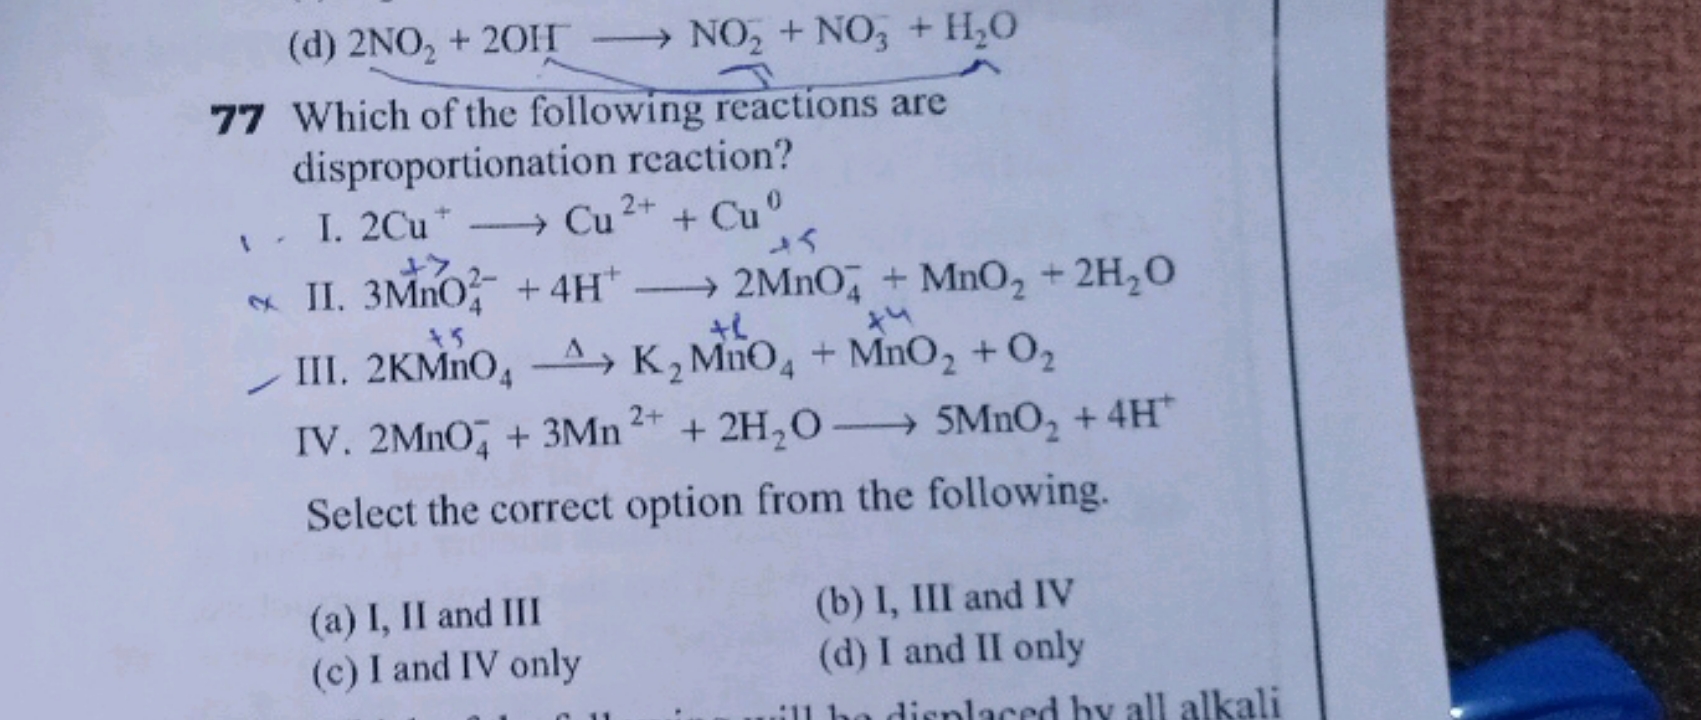 77 Which of the following reactions are disproportionation reaction? I